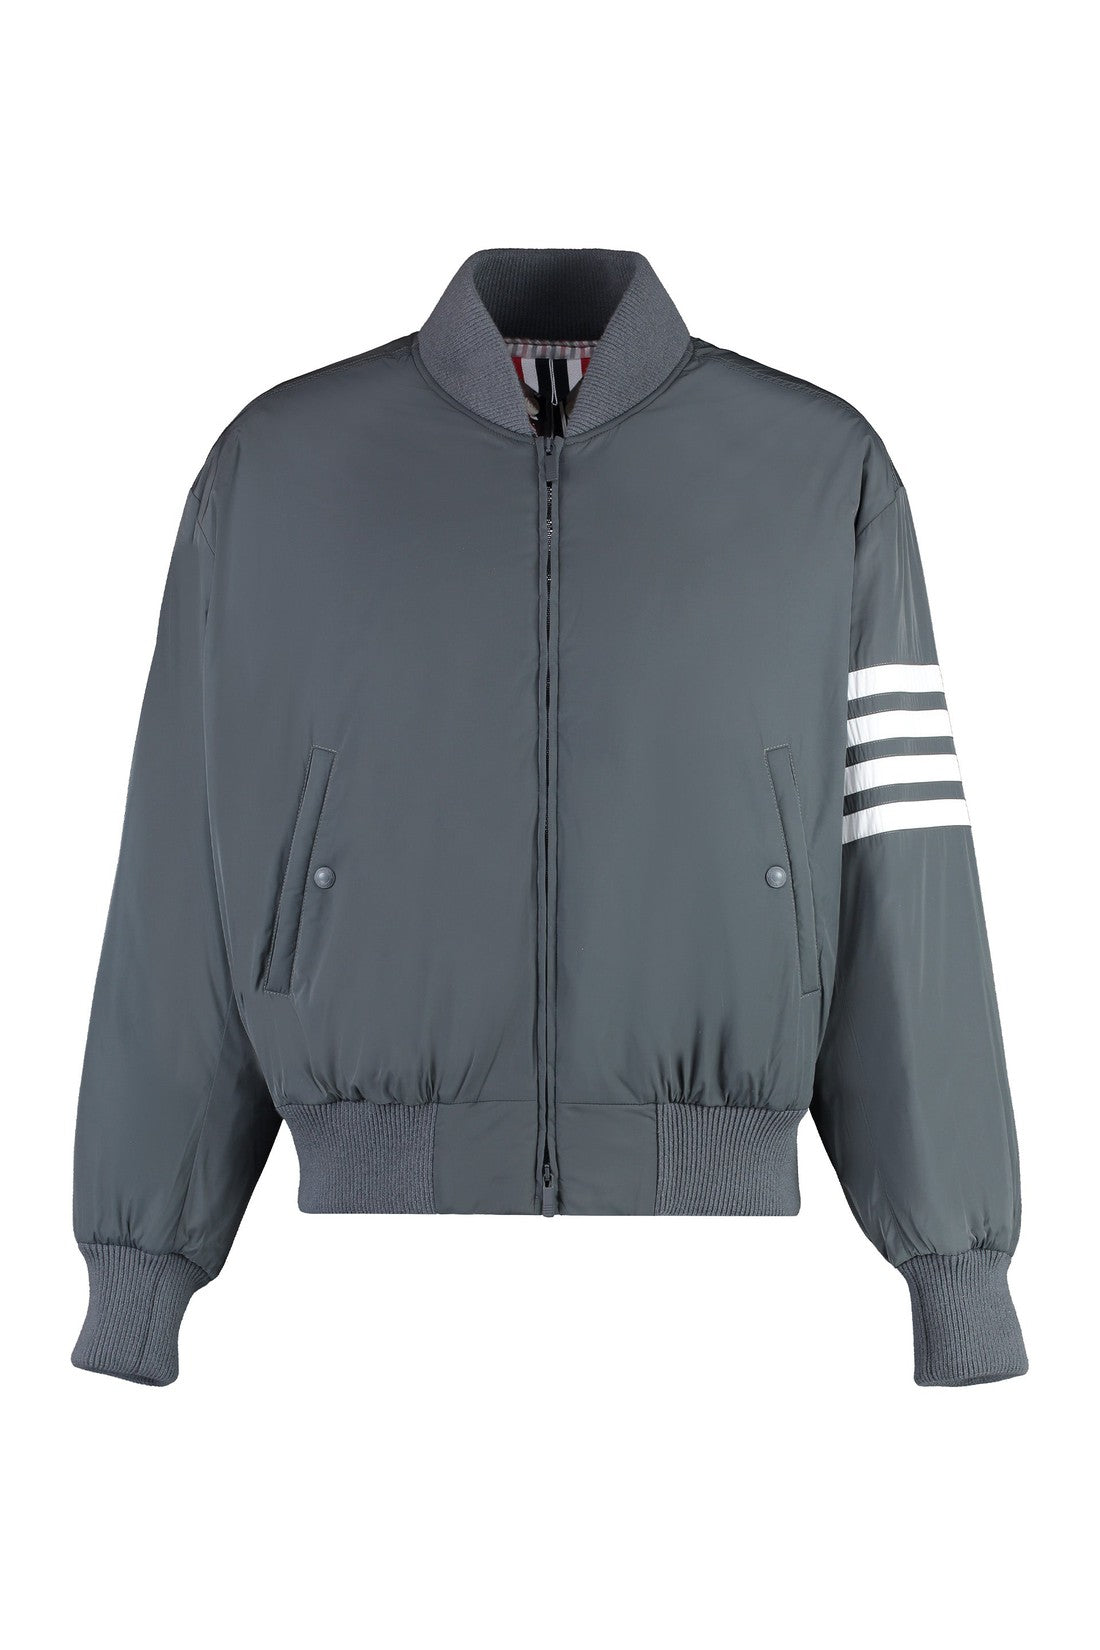 Thom Browne-OUTLET-SALE-Bomber jacket in technical fabric-ARCHIVIST